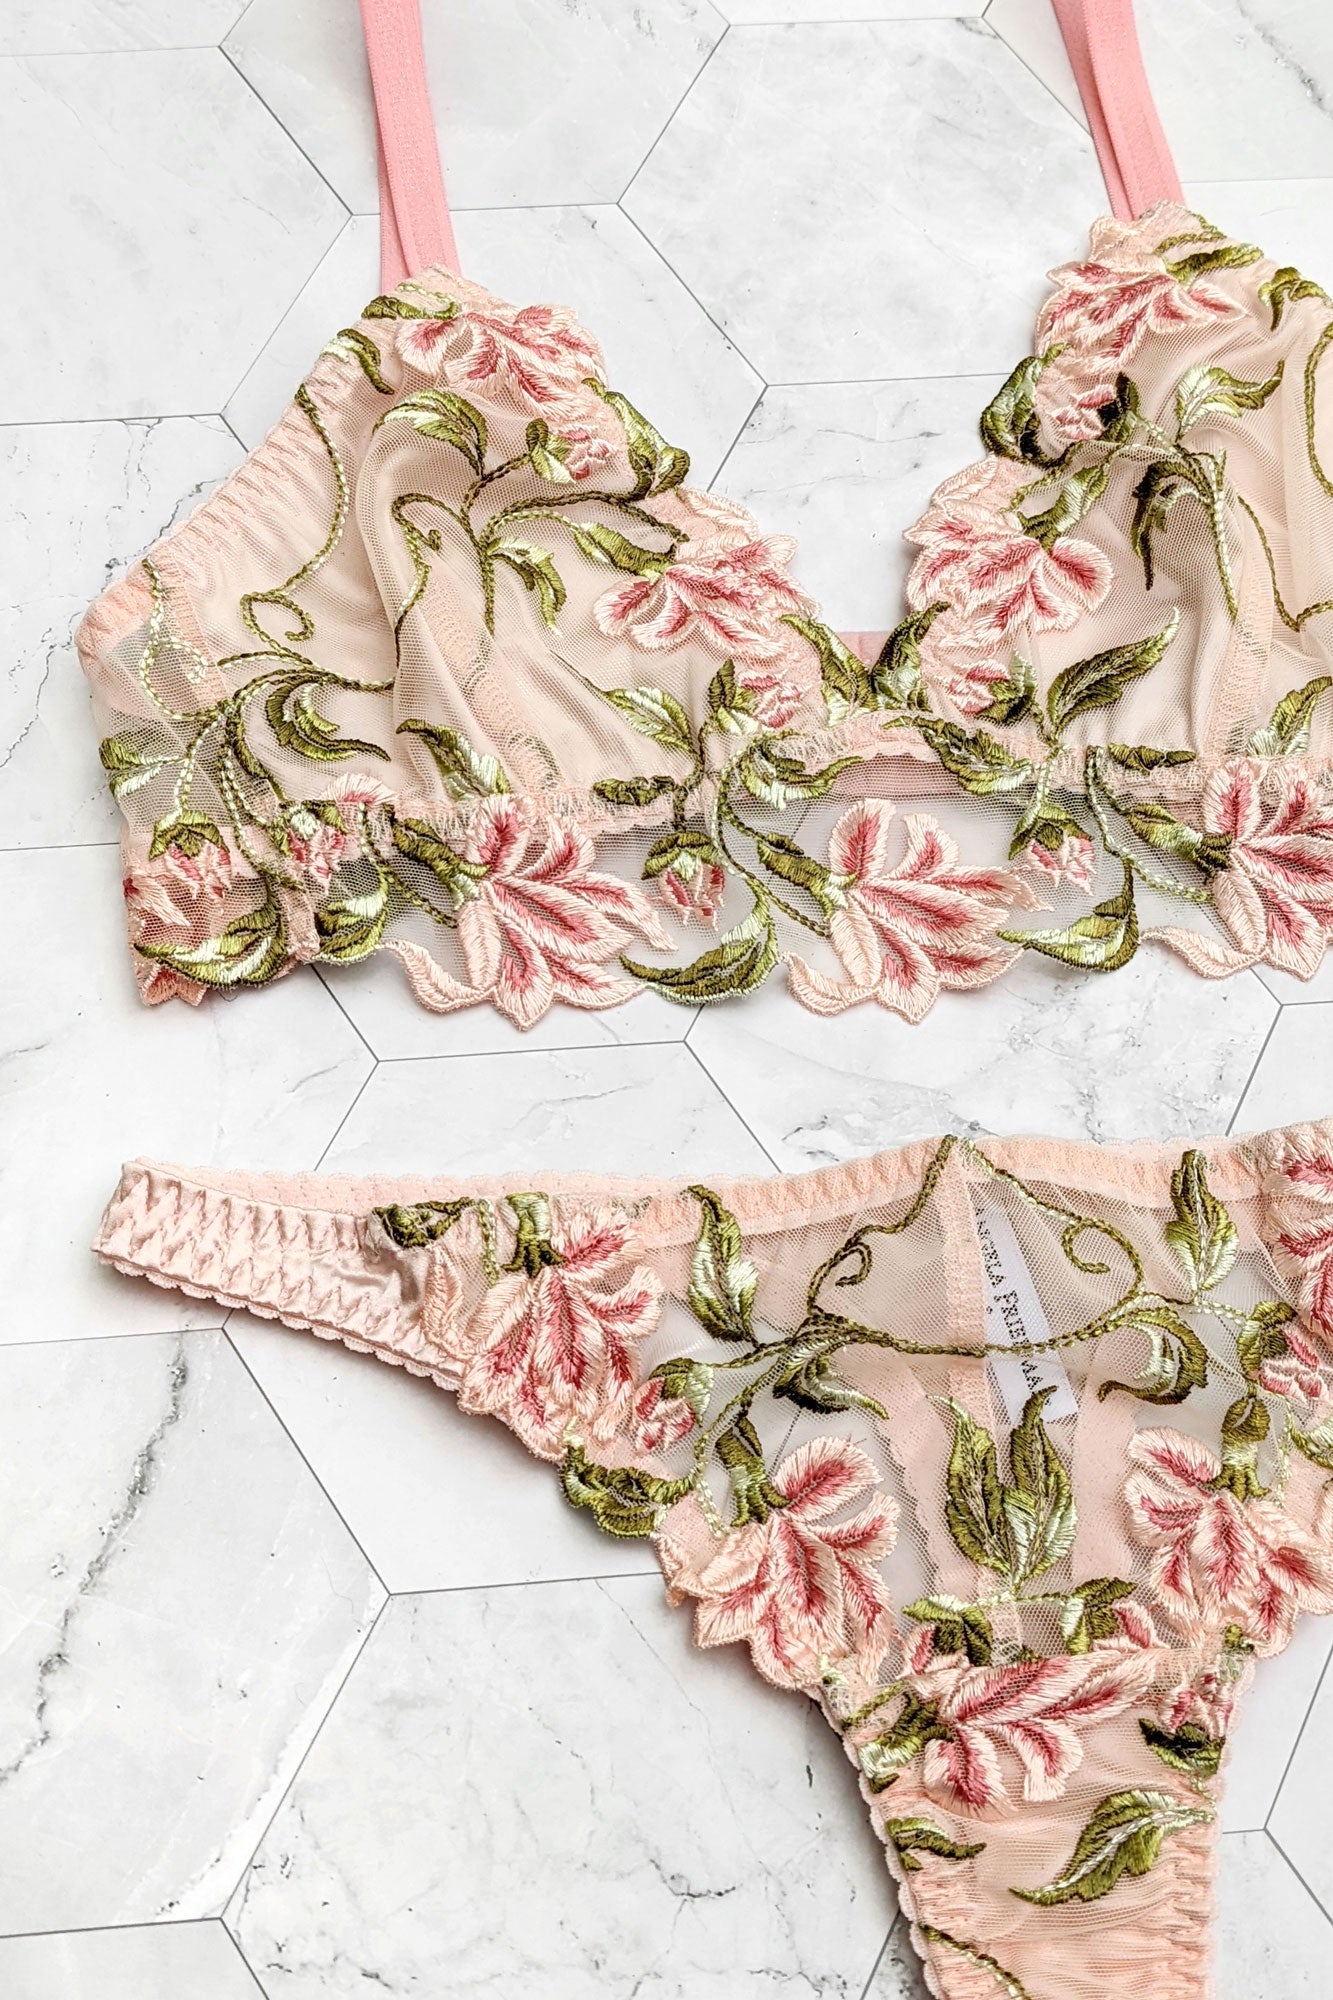 Floral bra and thong knickers, handmade by designer Angela Friedman